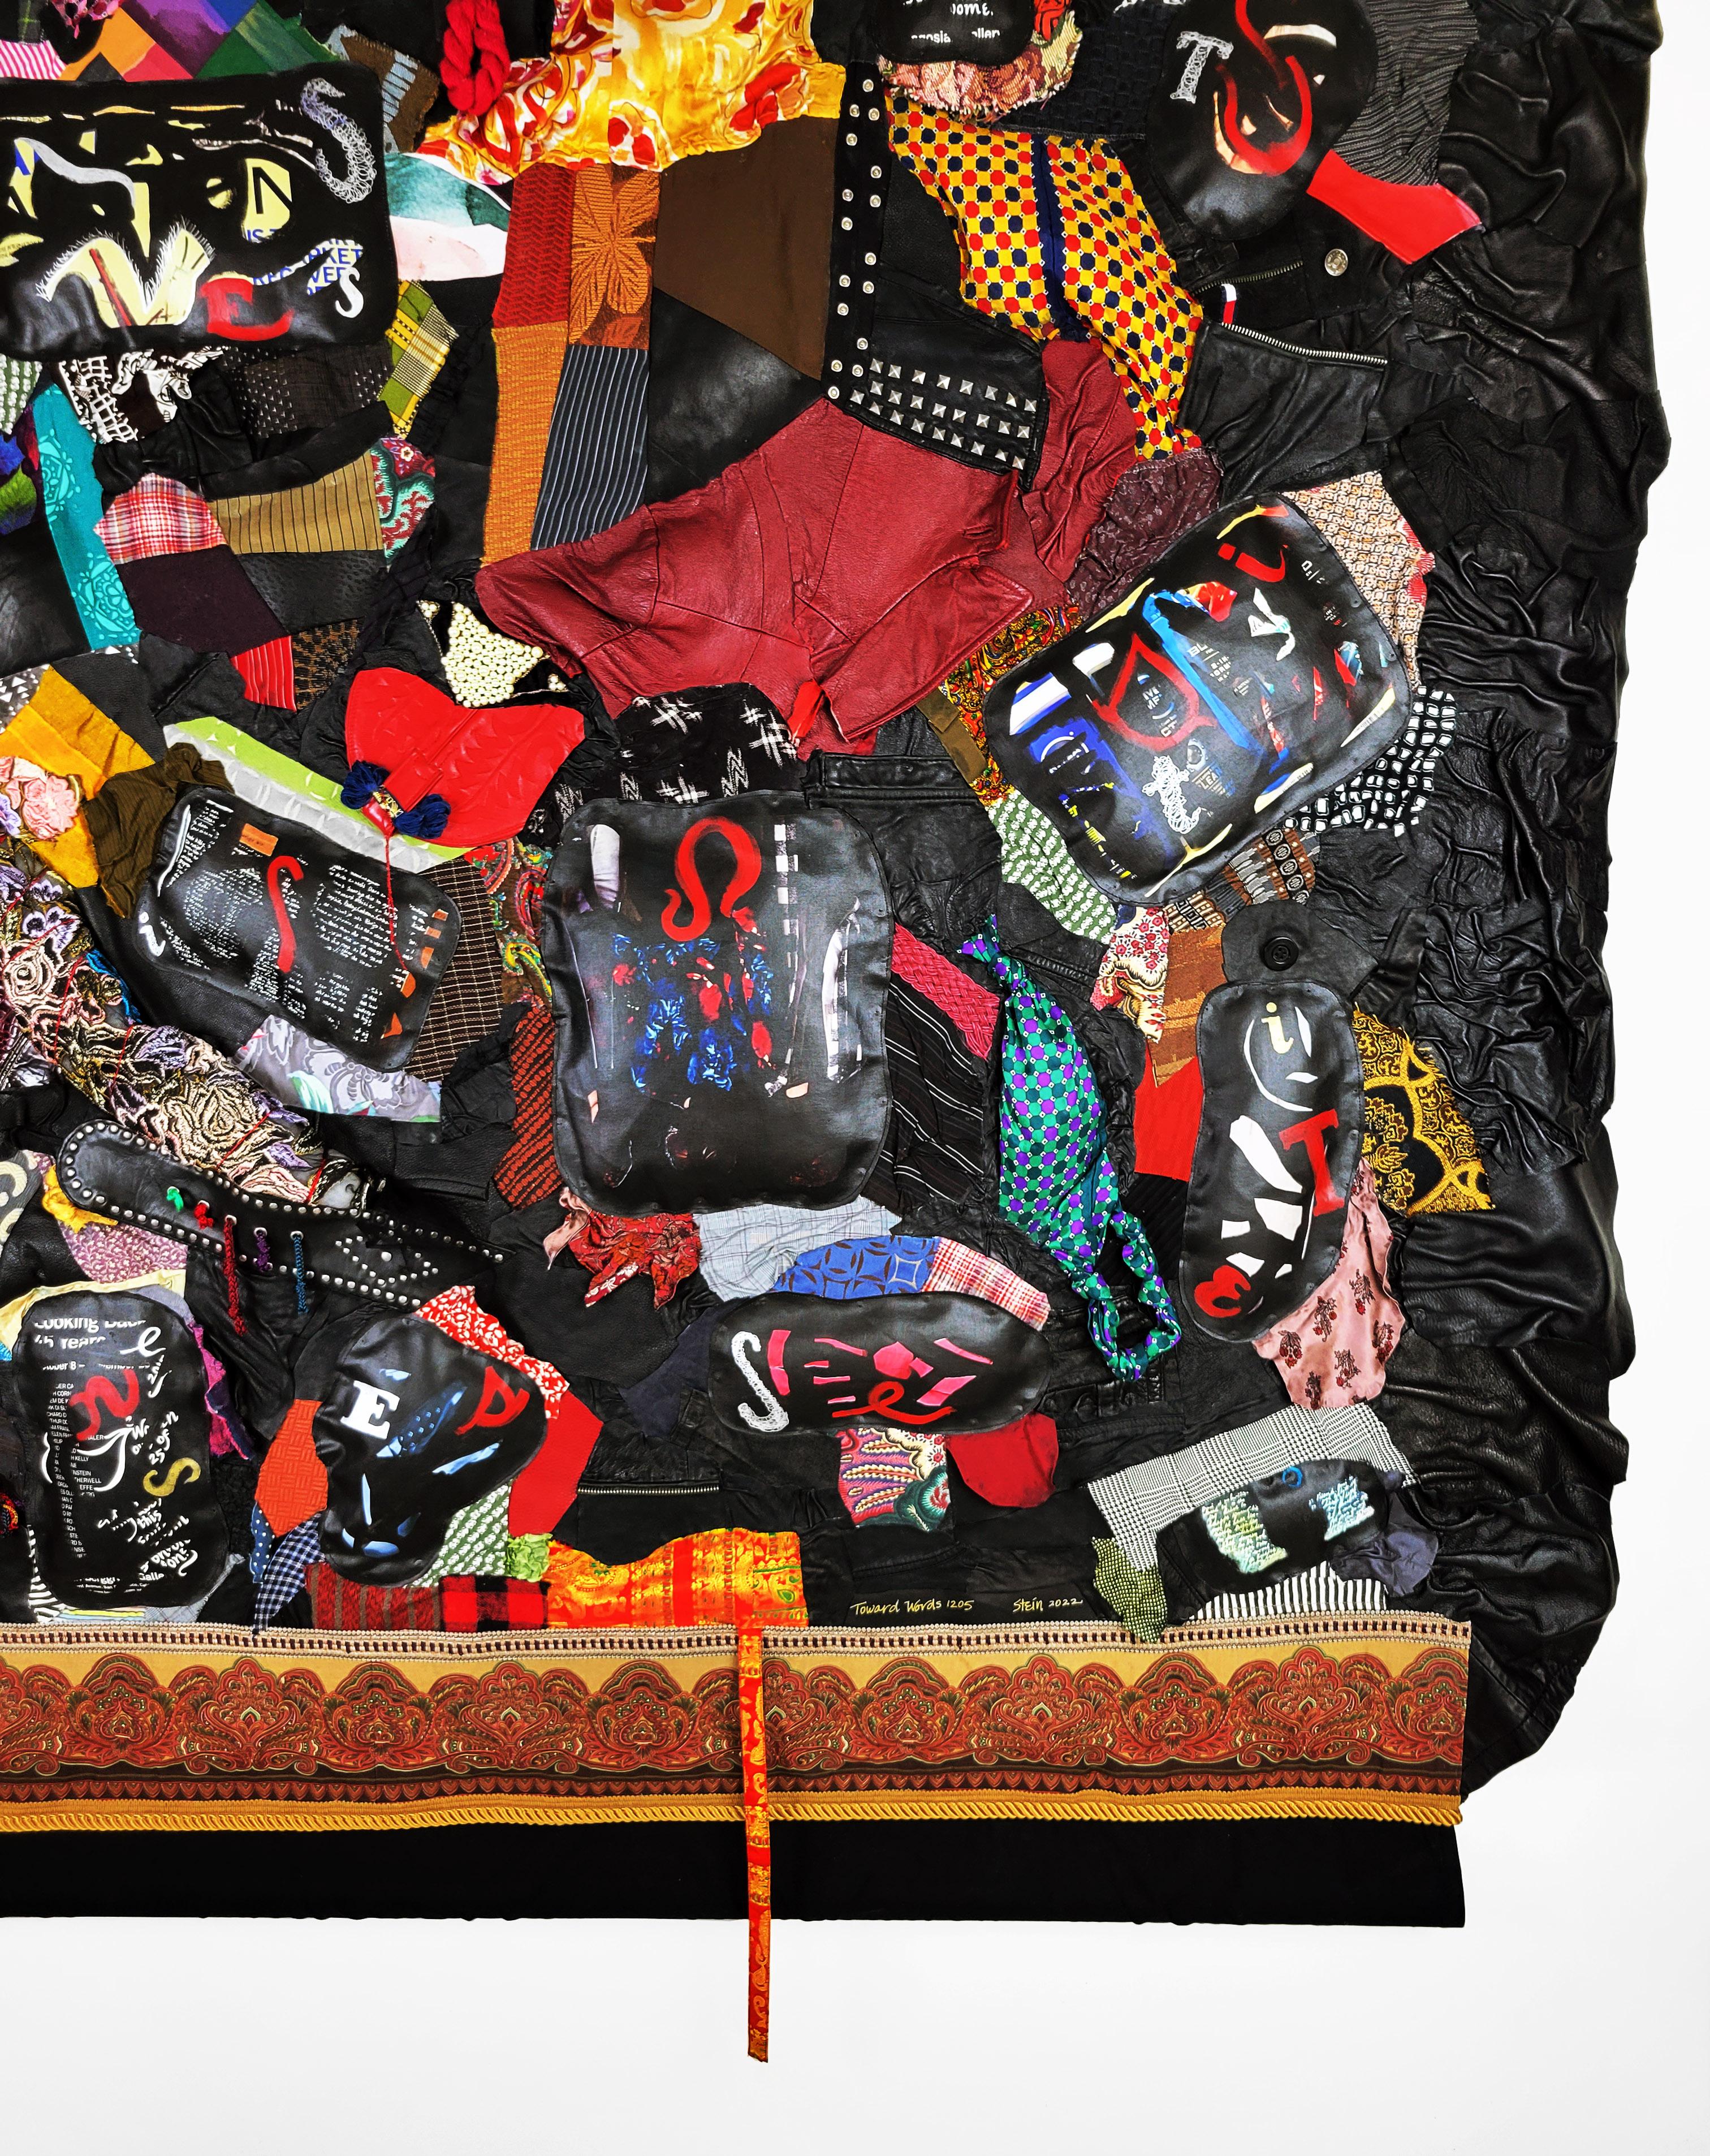 Linda Stein began to produce sculptural tapestries in 2013, in which she combines archival images of a subject with multiple fabrics and leather. Toward Words 1205 is one of Stein's abstract works, in which she repeats the same letters through the